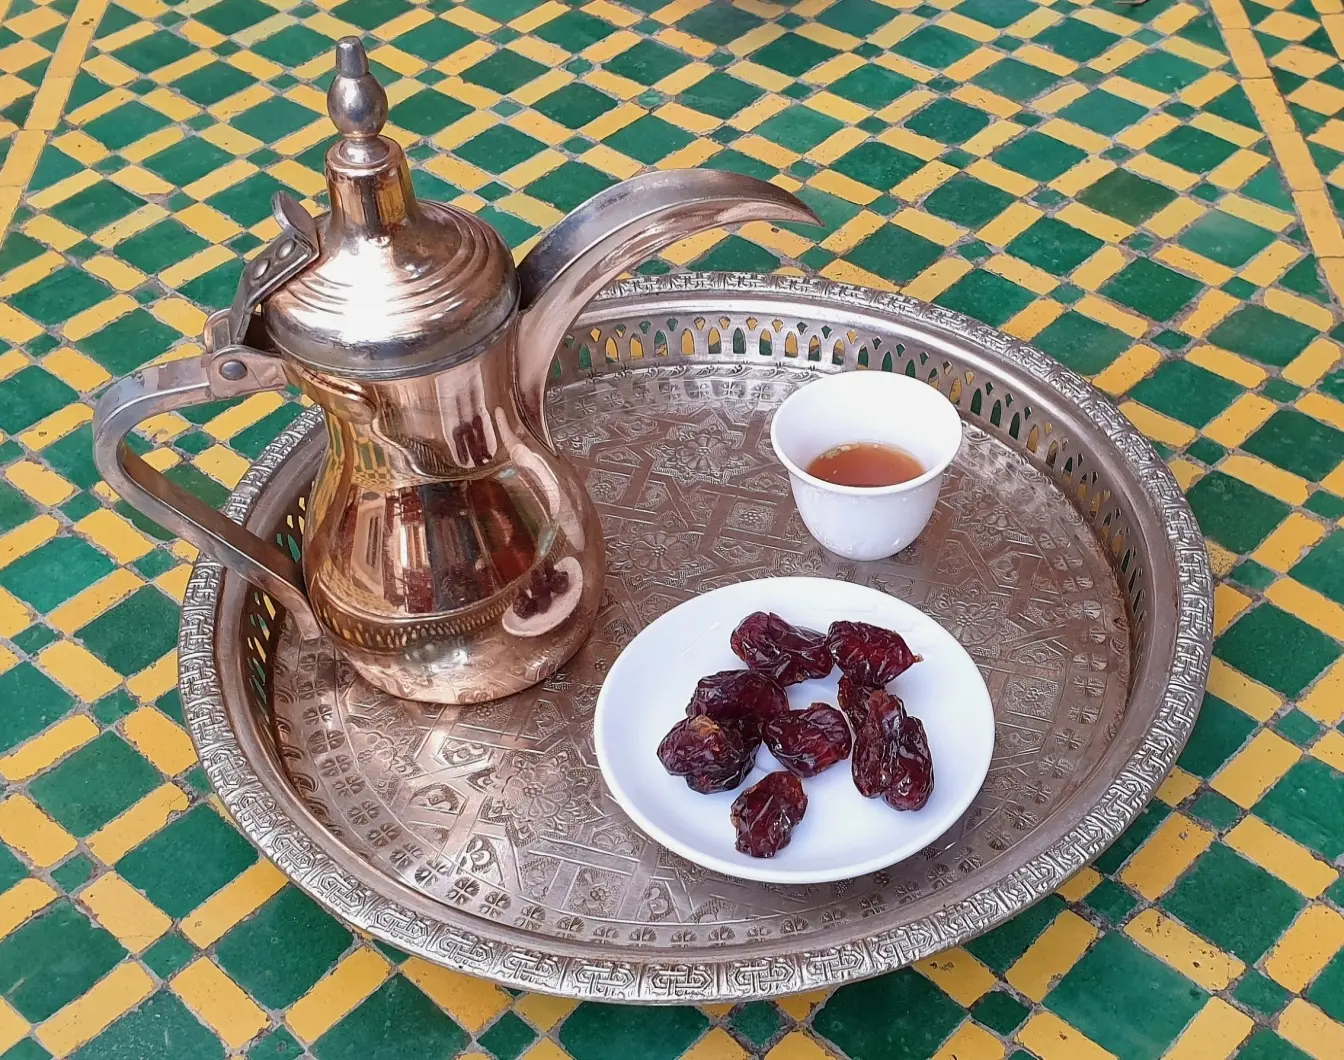 In the United Arab Emirates my Arabian coffee was served with a small plate of dates